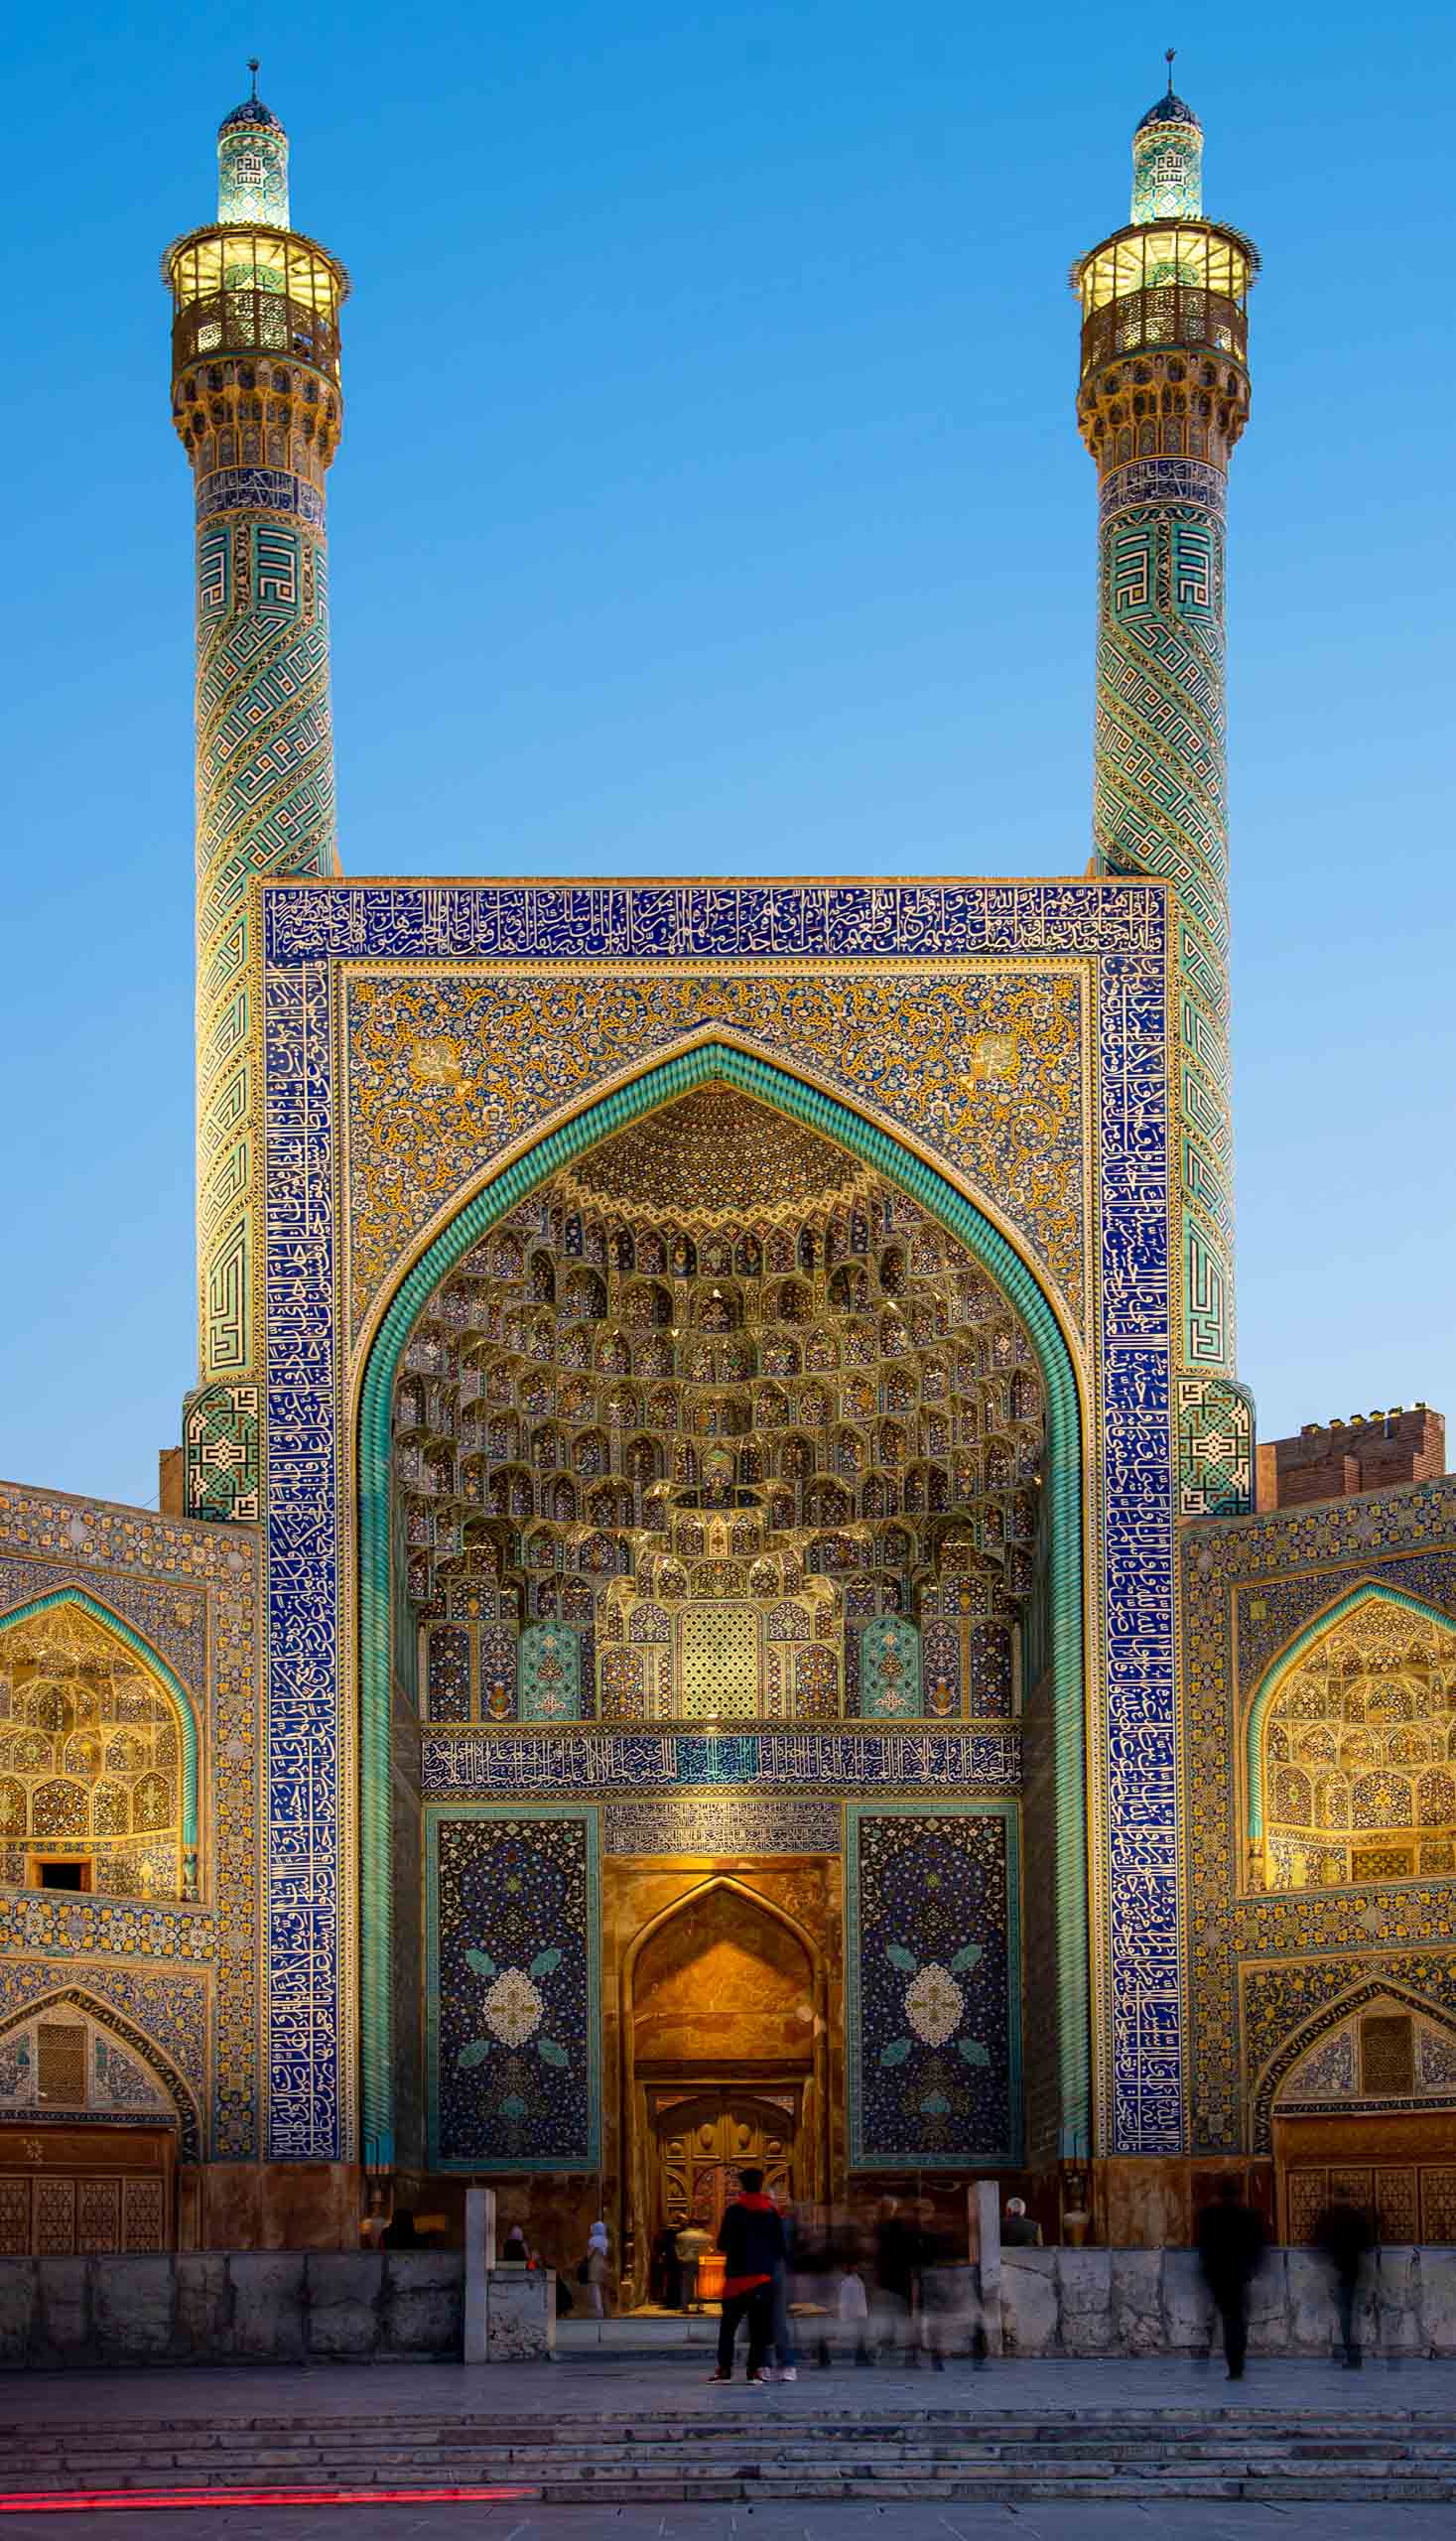 Night view of the main entrance of the Imam Mosque, Isfahan, Iran.